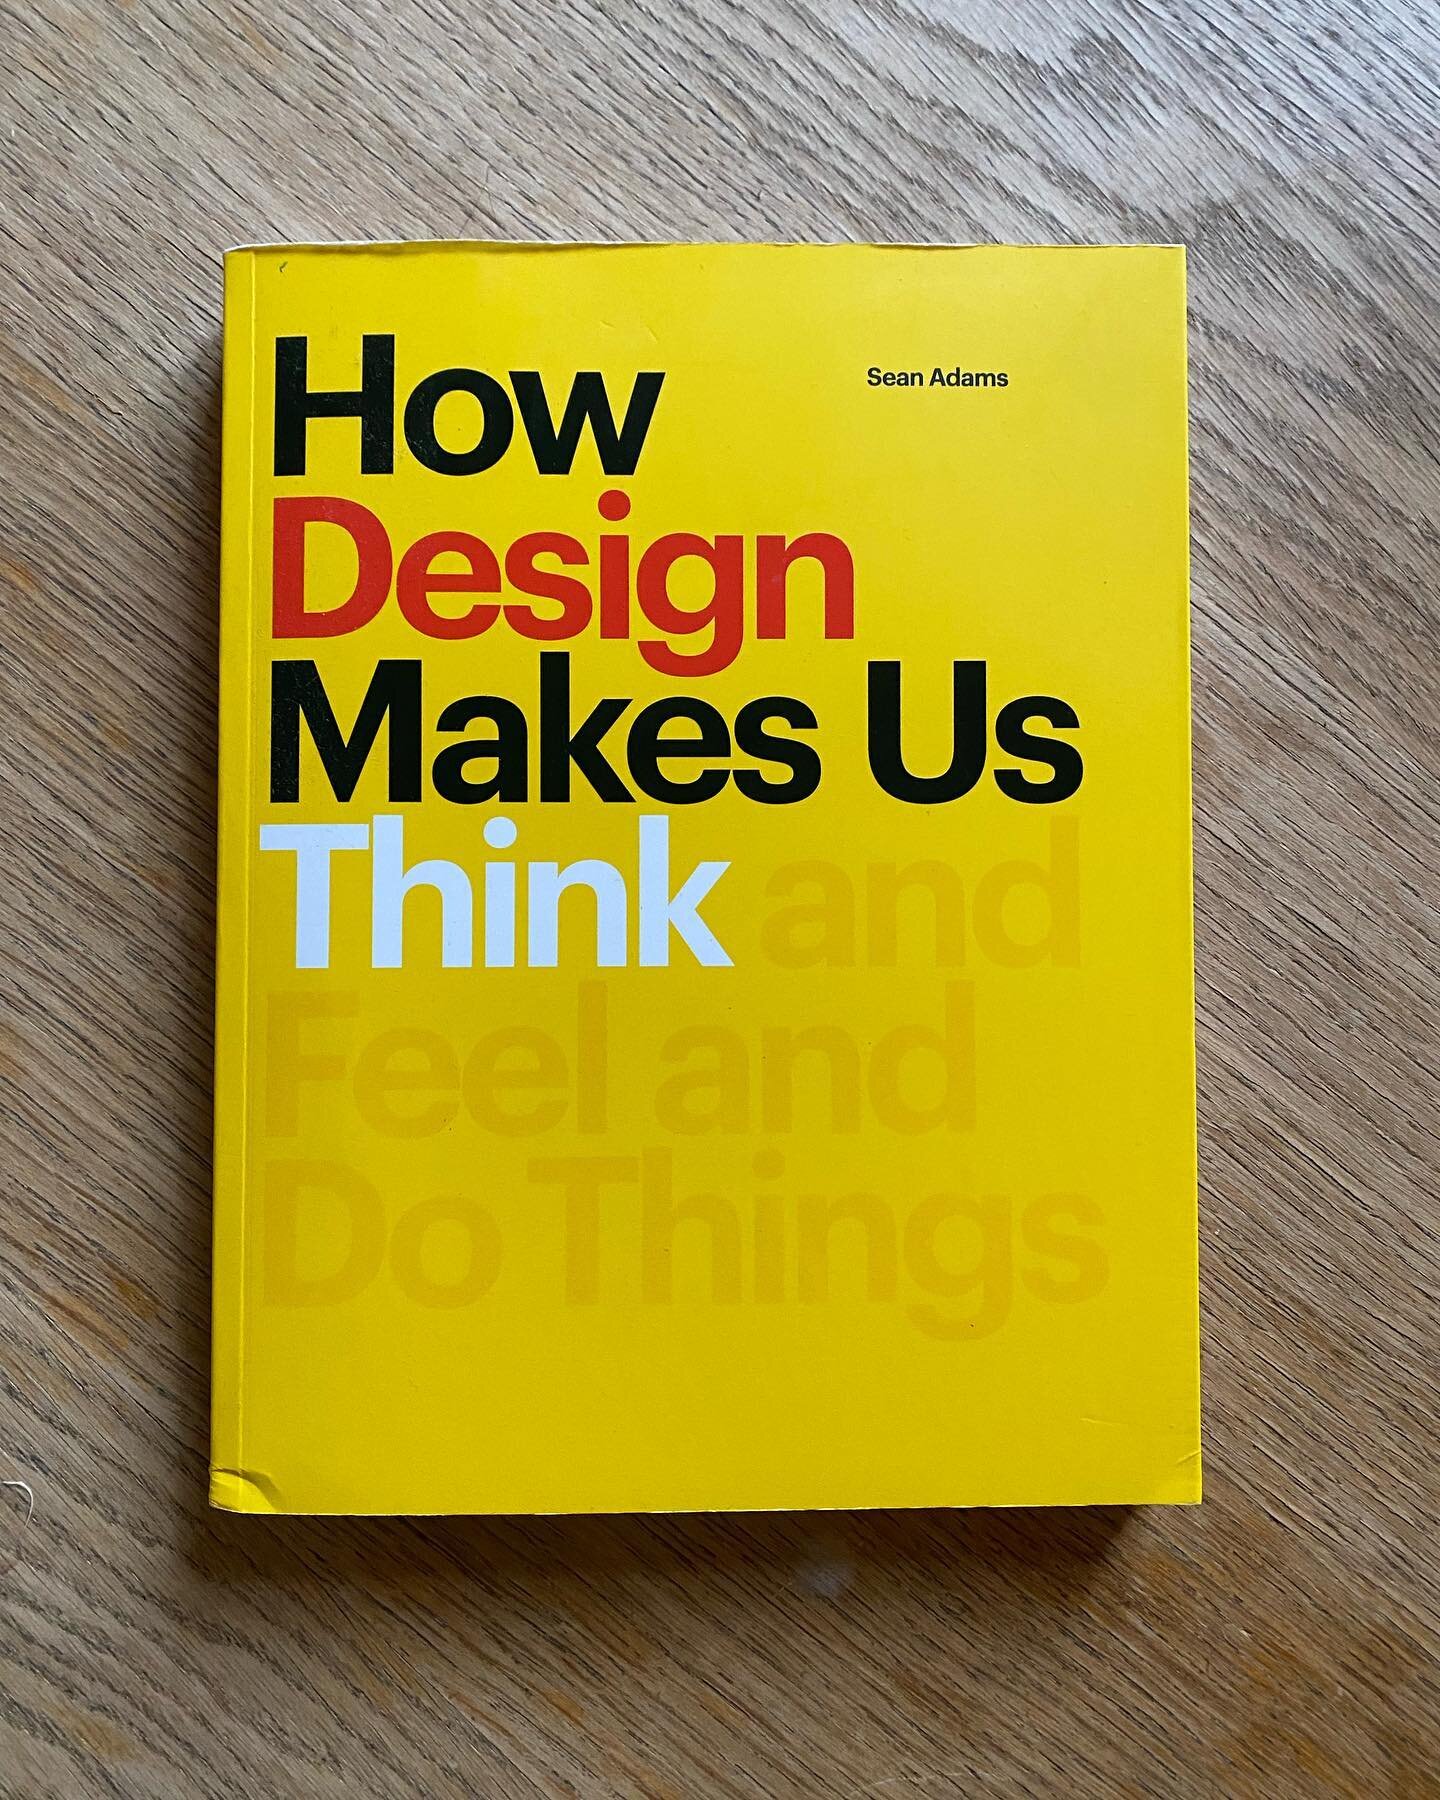 🧠 How to communicate intelligence with design? Here are some attributes that are fundamental to communicate a profound message:

✔️ Subgoals: Break hard problems into simpler ones
✔️ Sub-objects: Make descriptions based on parts and relations
✔️ Cau